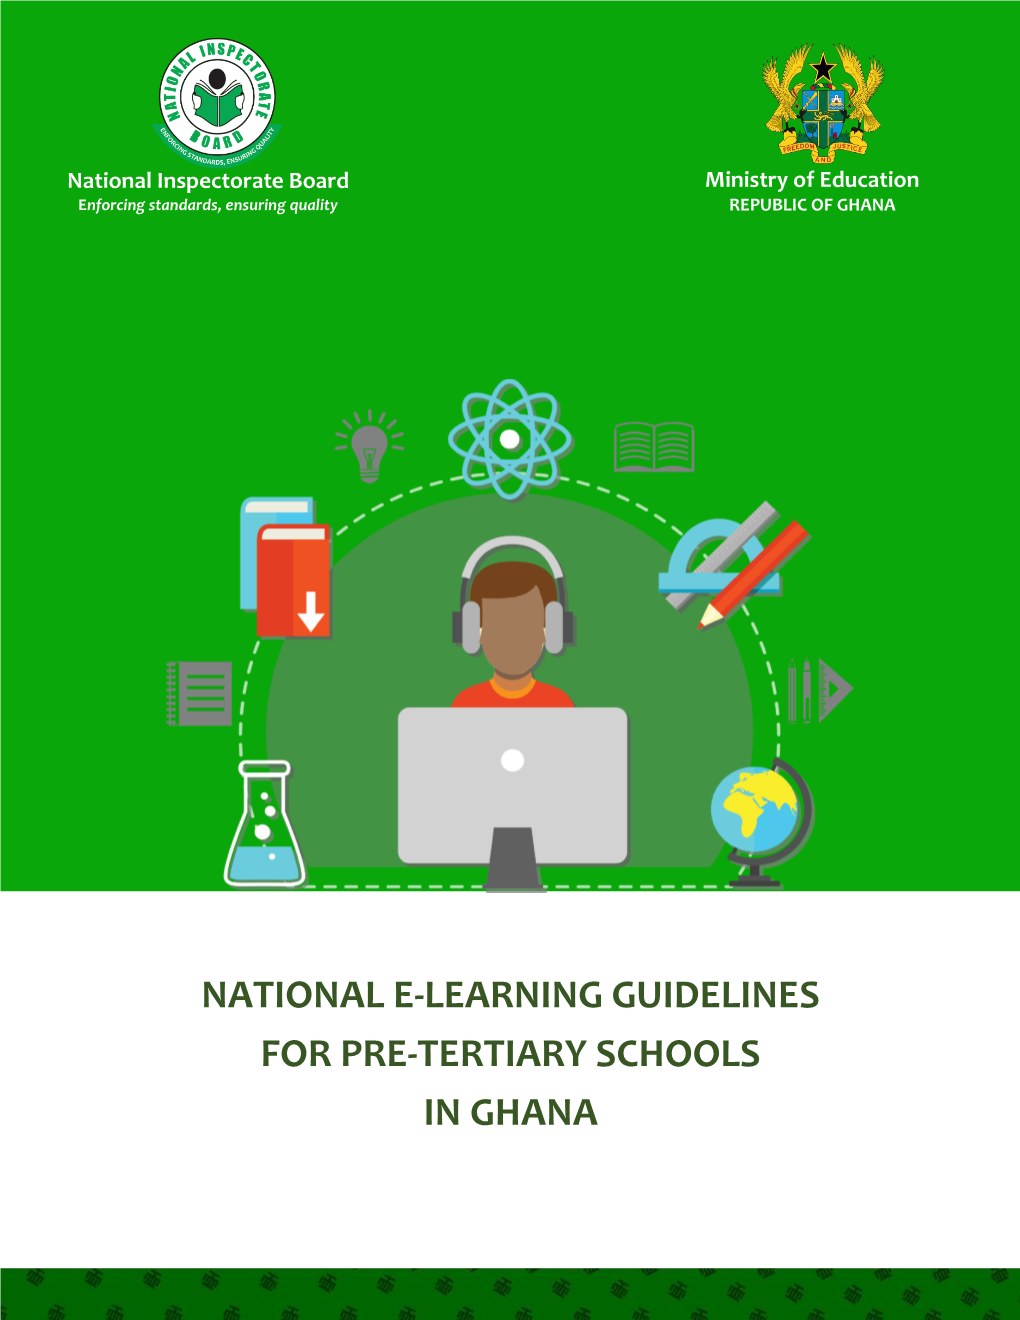 National E-Learning Guidelines for Pre-Tertiary Schools in Ghana